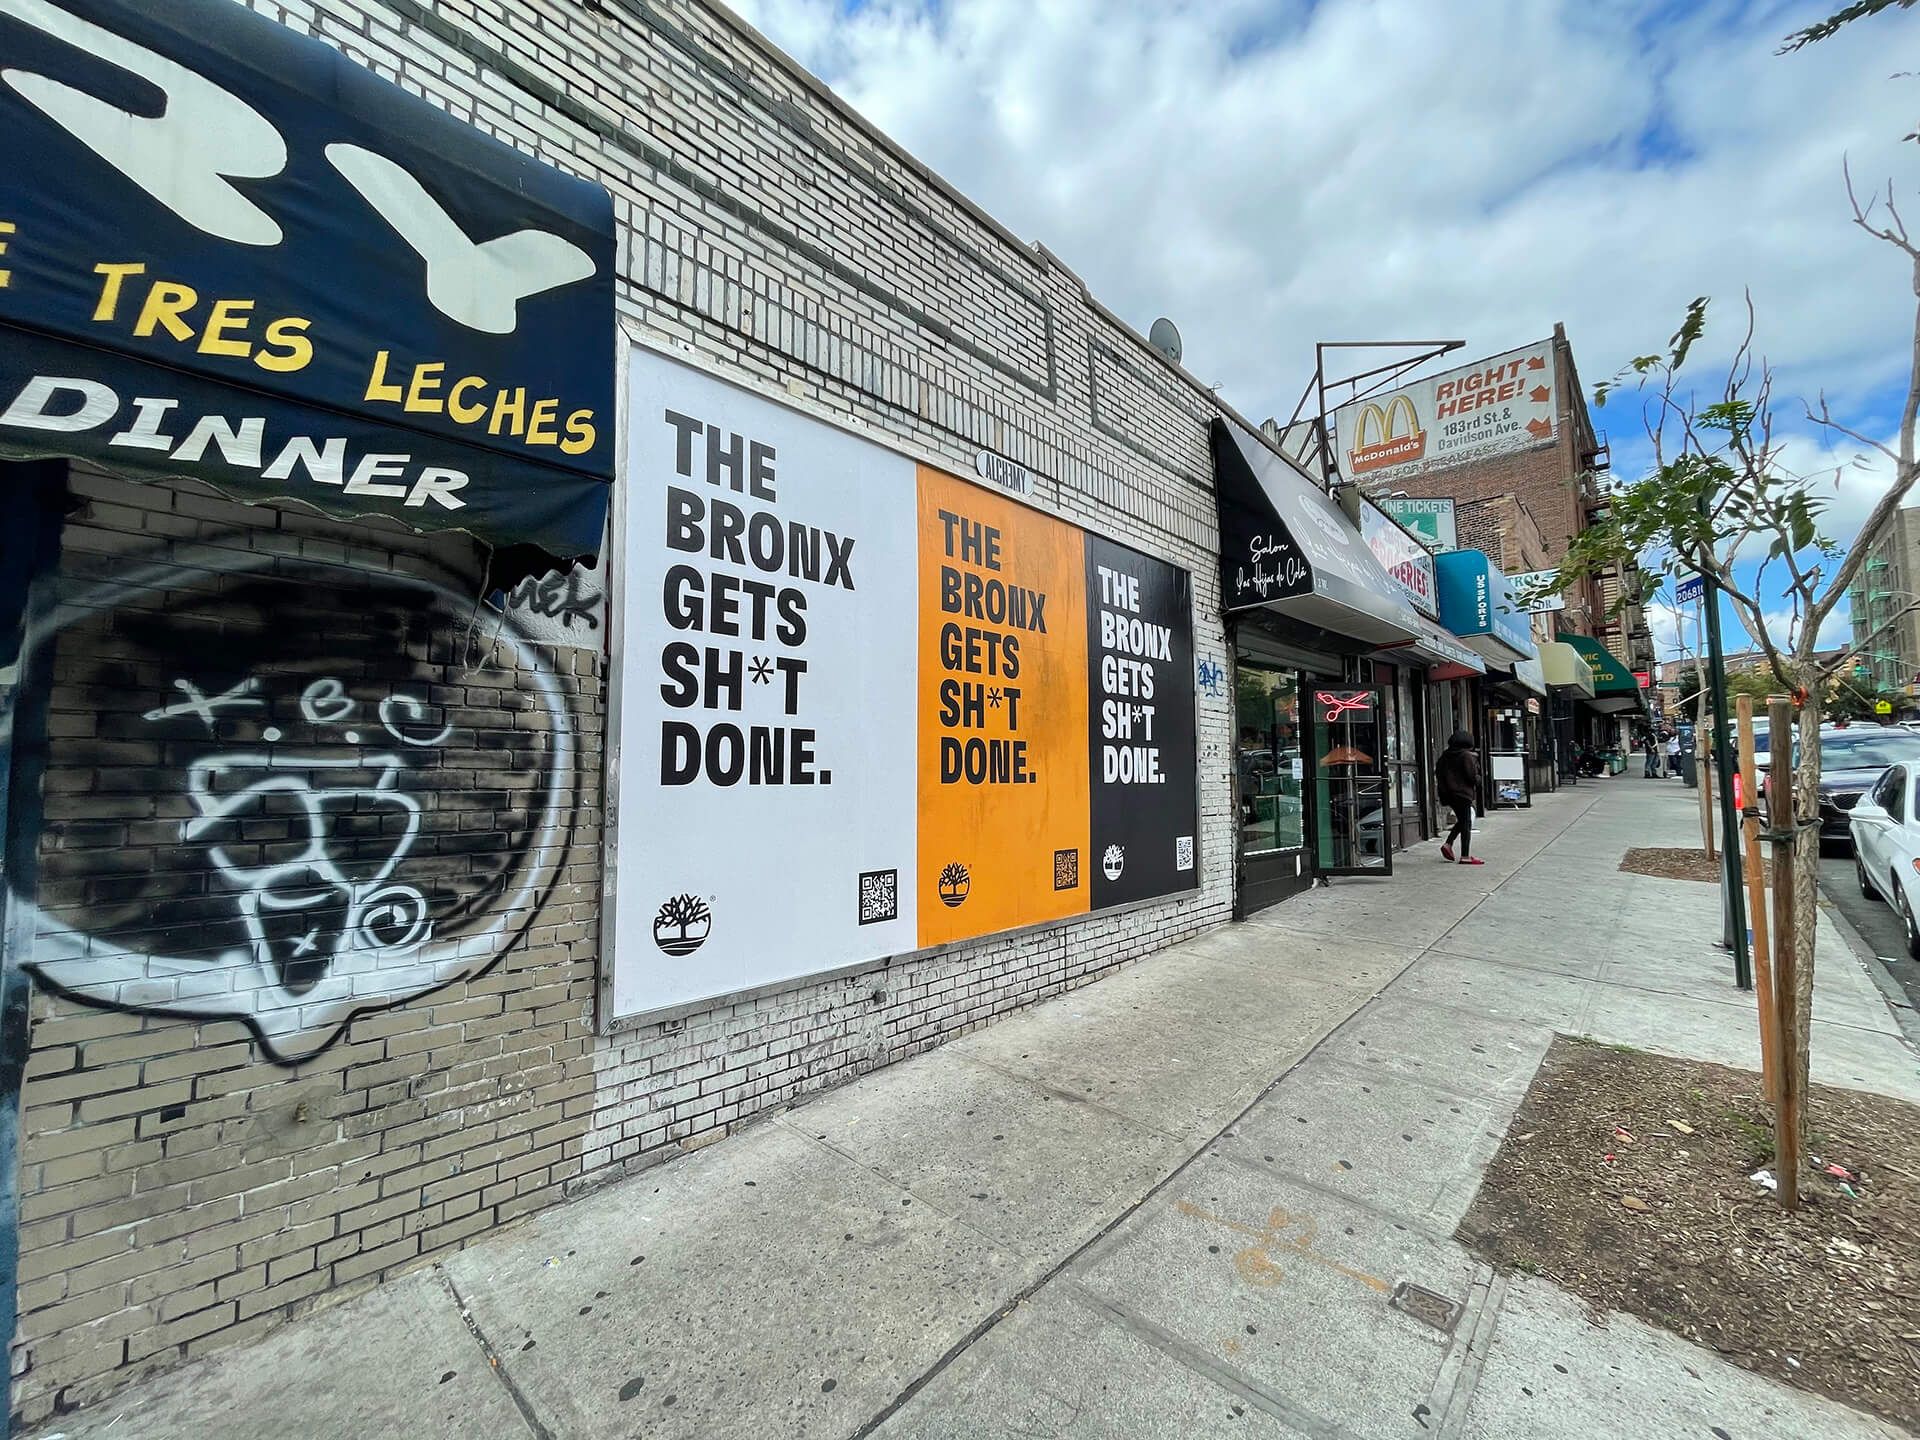 The Bronx gets sh*t done posters on city wall